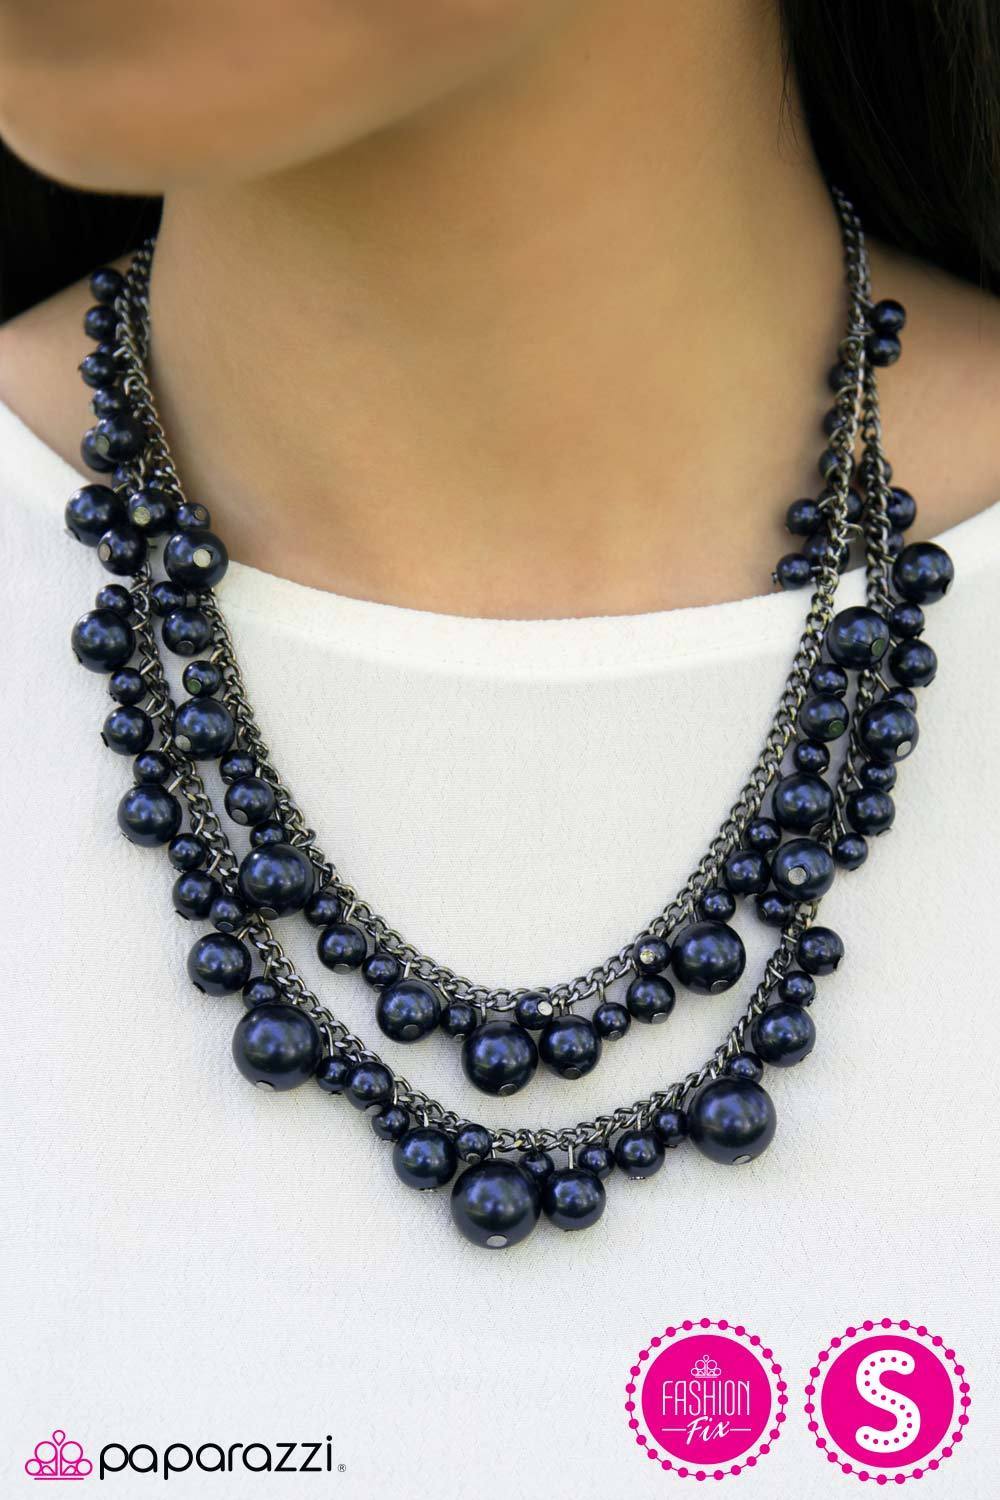 Nightfall Navy Blue Pearl and Gunmetal Necklace - Paparazzi Accessories-CarasShop.com - $5 Jewelry by Cara Jewels